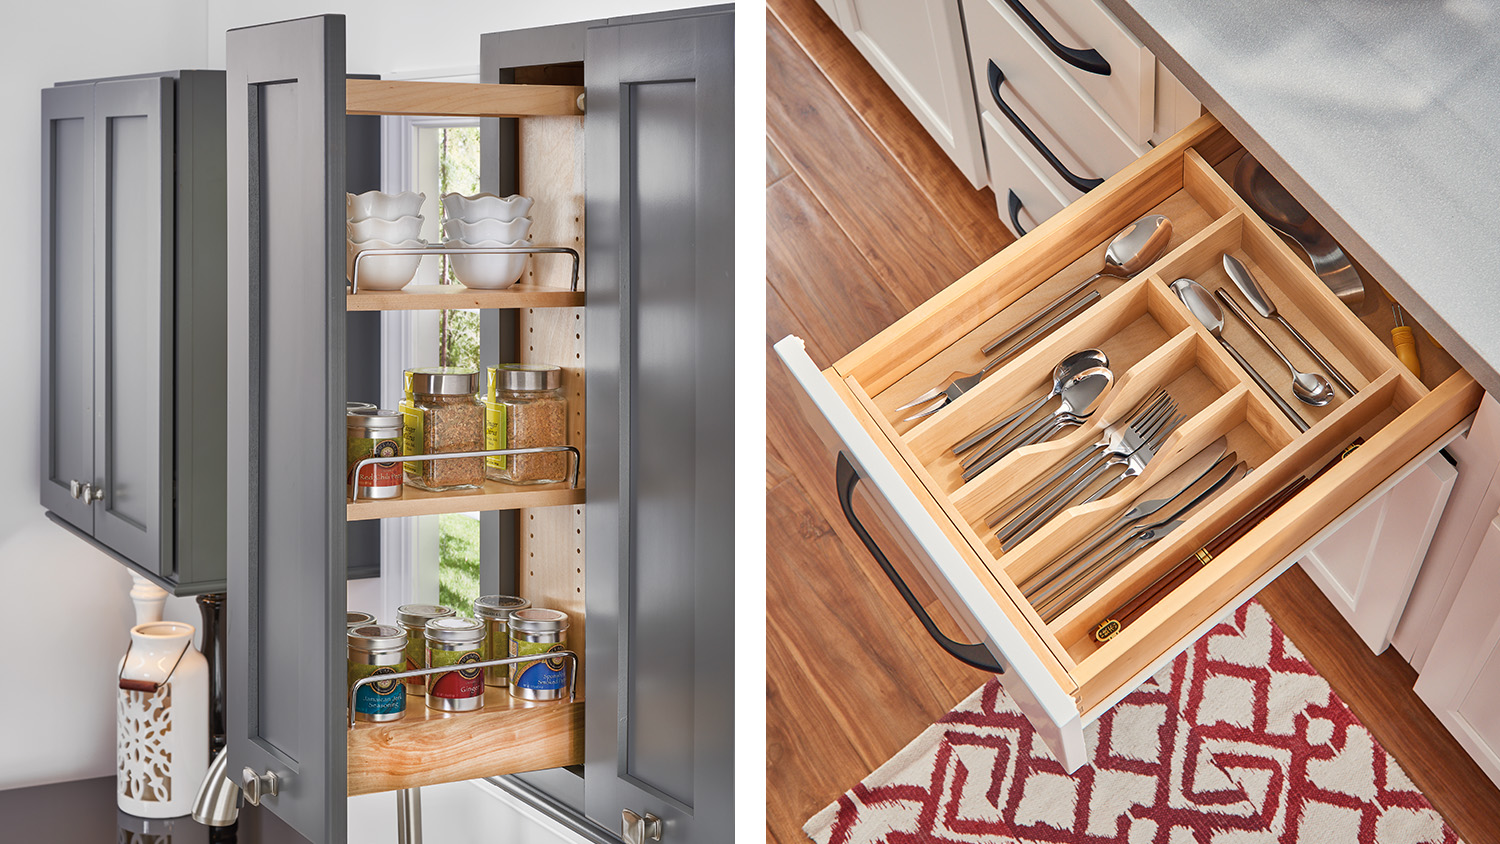 https://www.wholesalecabinets.us/media/catalog/category/Silverware-Organizer-and-Upper-Cabinet-Pullout_1.jpg